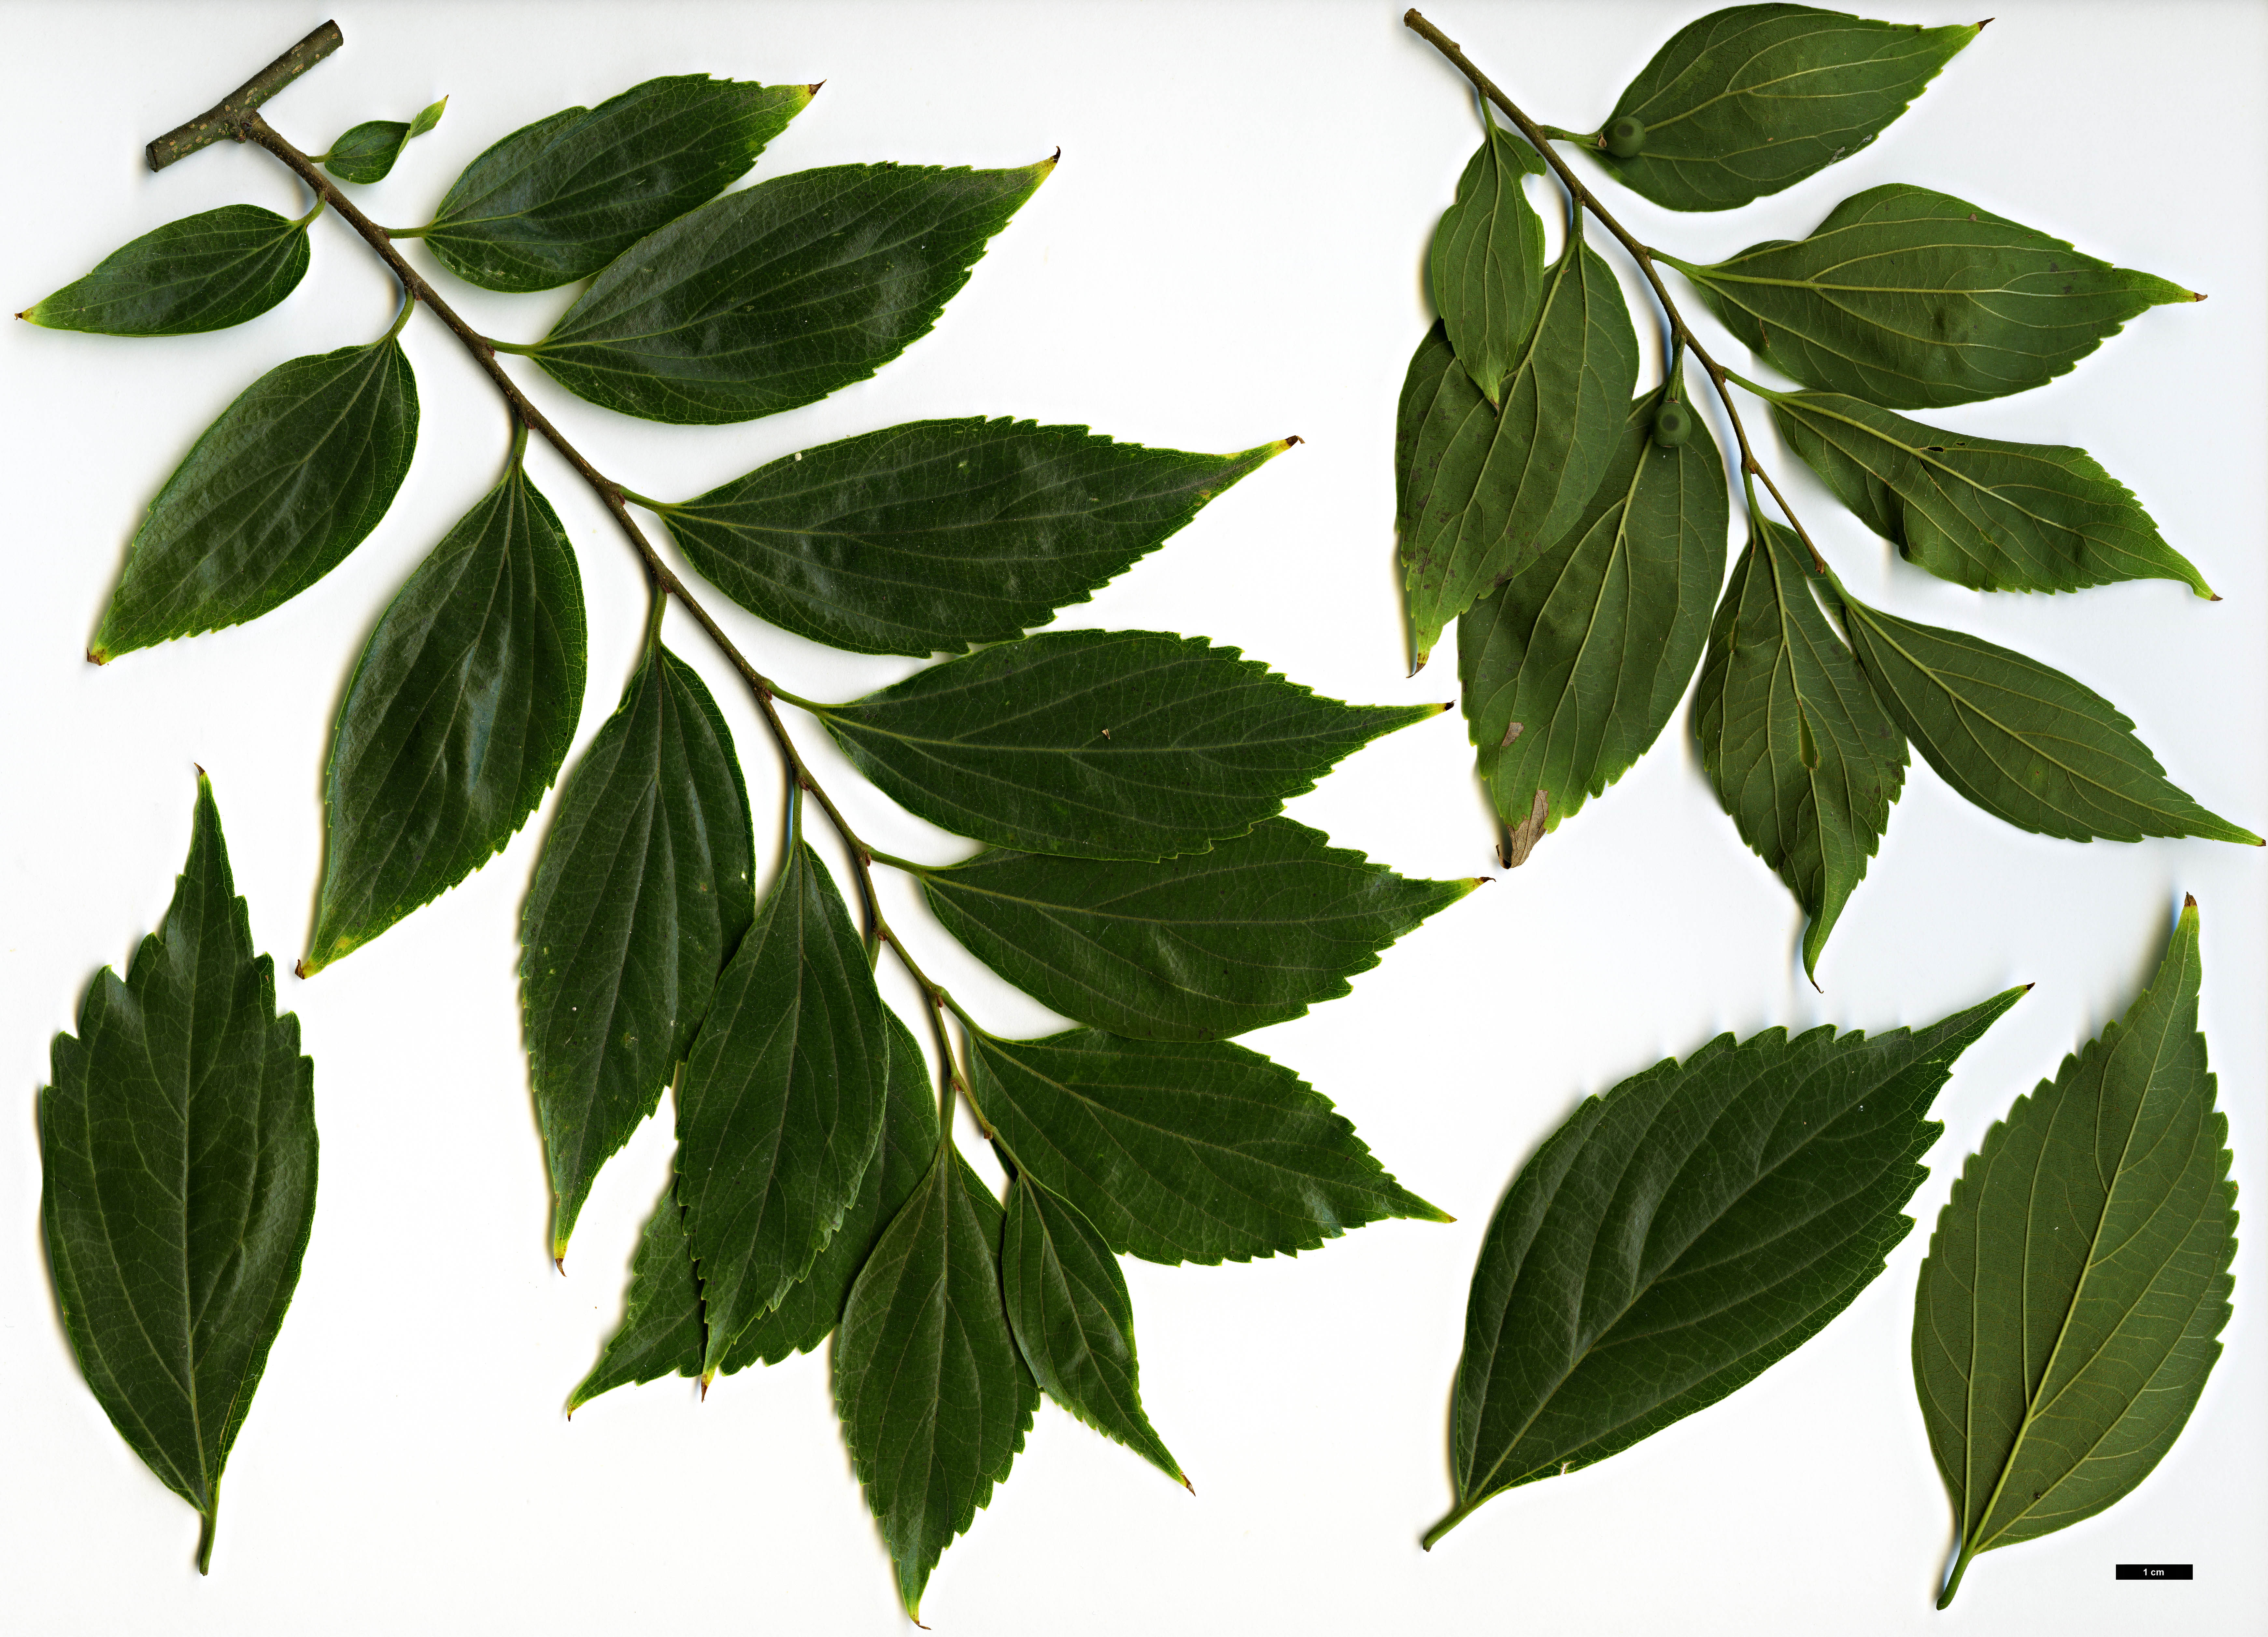 High resolution image: Family: Cannabaceae - Genus: Celtis - Taxon: sinensis